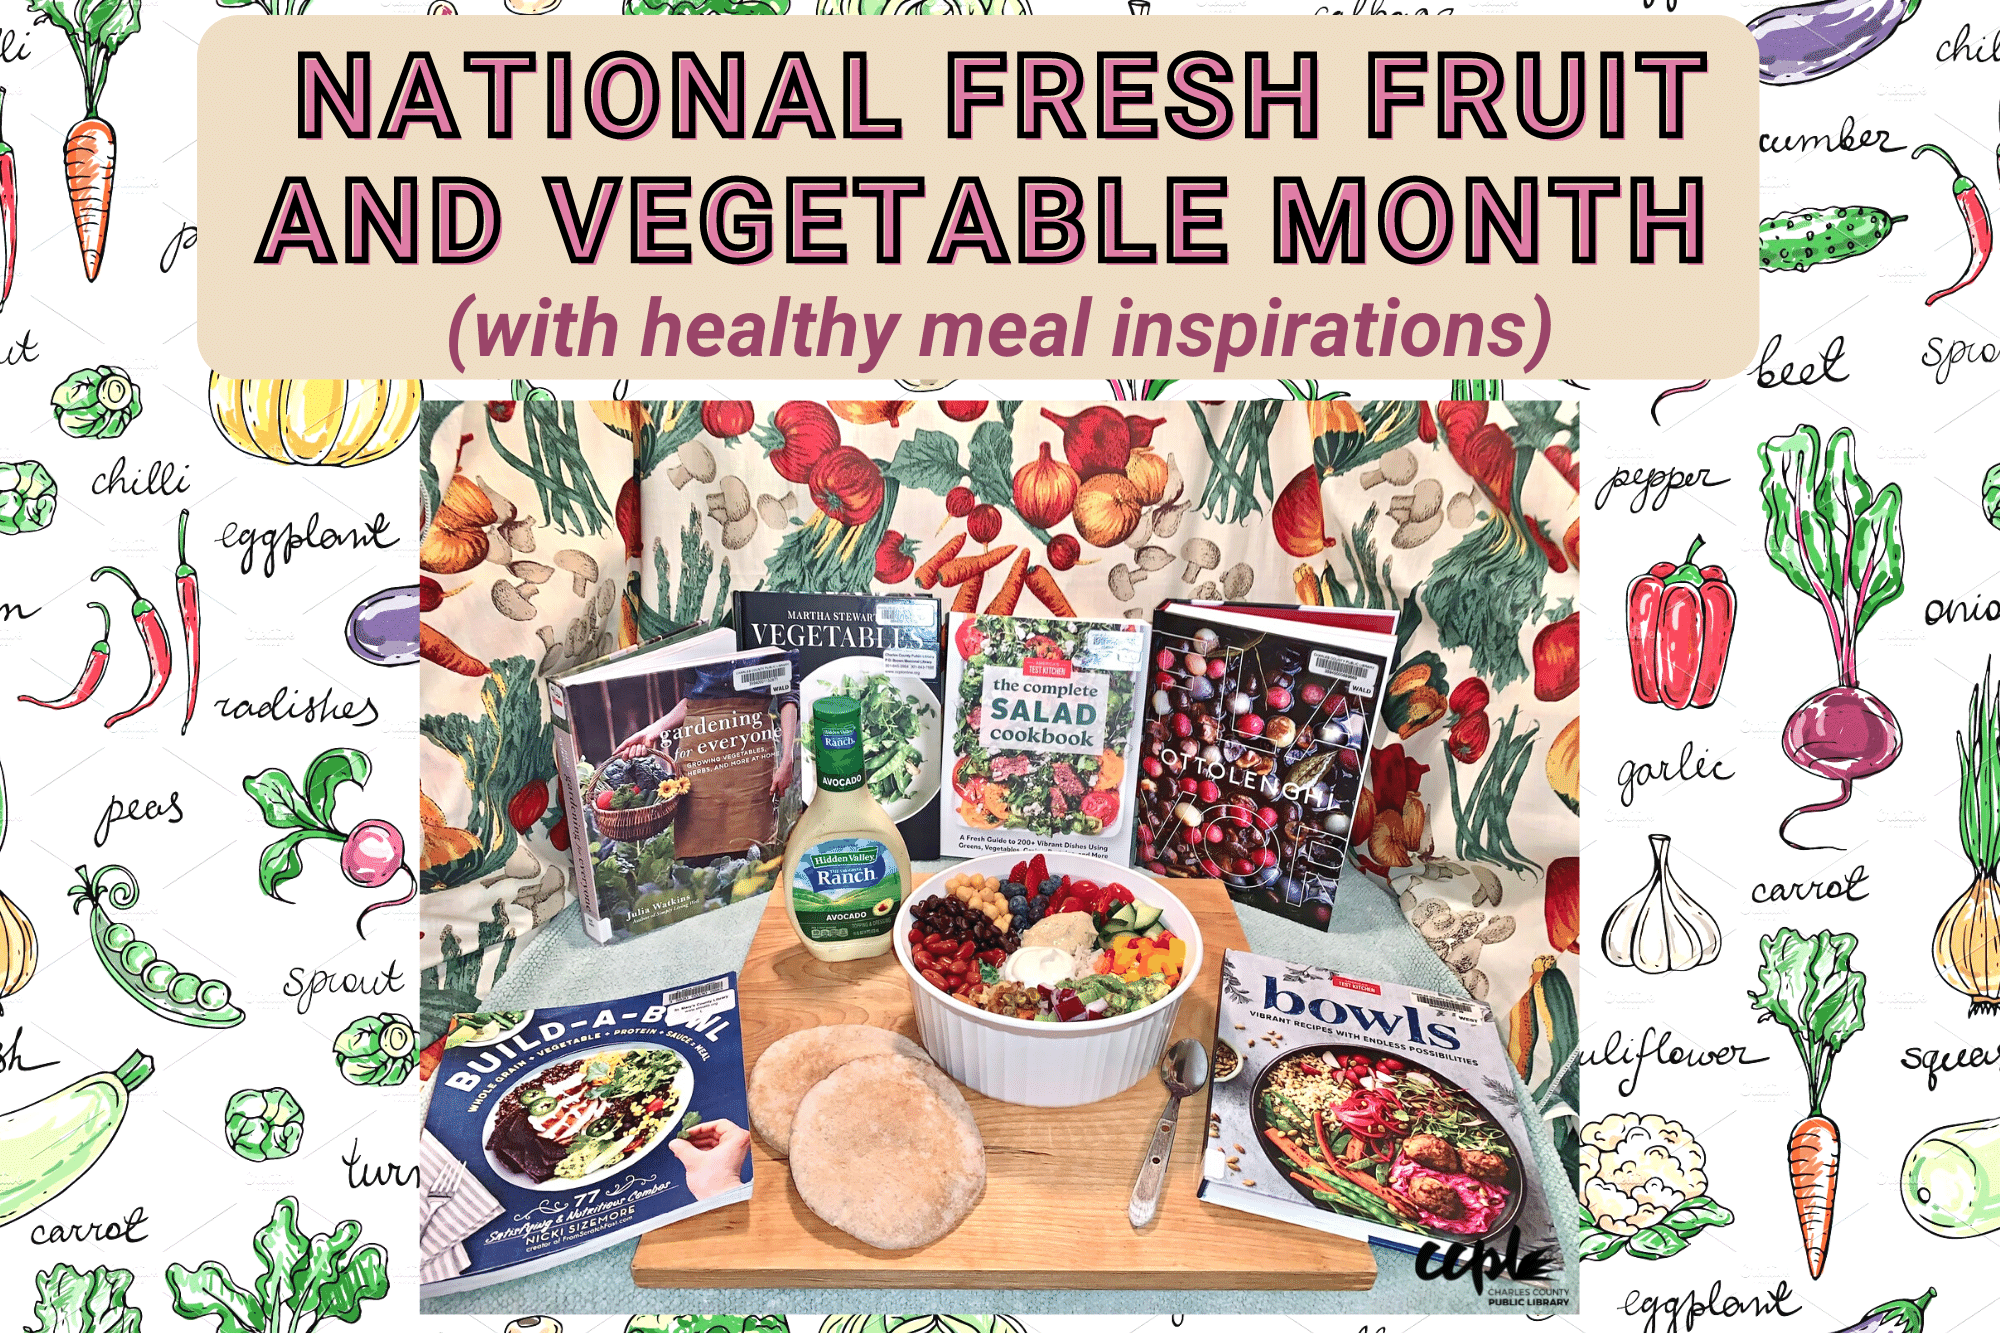 https://ccplonline.org/wp-content/uploads/2022/05/National-Fresh-Fruit-and-Vegetable-Month-with-healthy-meal-inspirations-Cover-Image.png